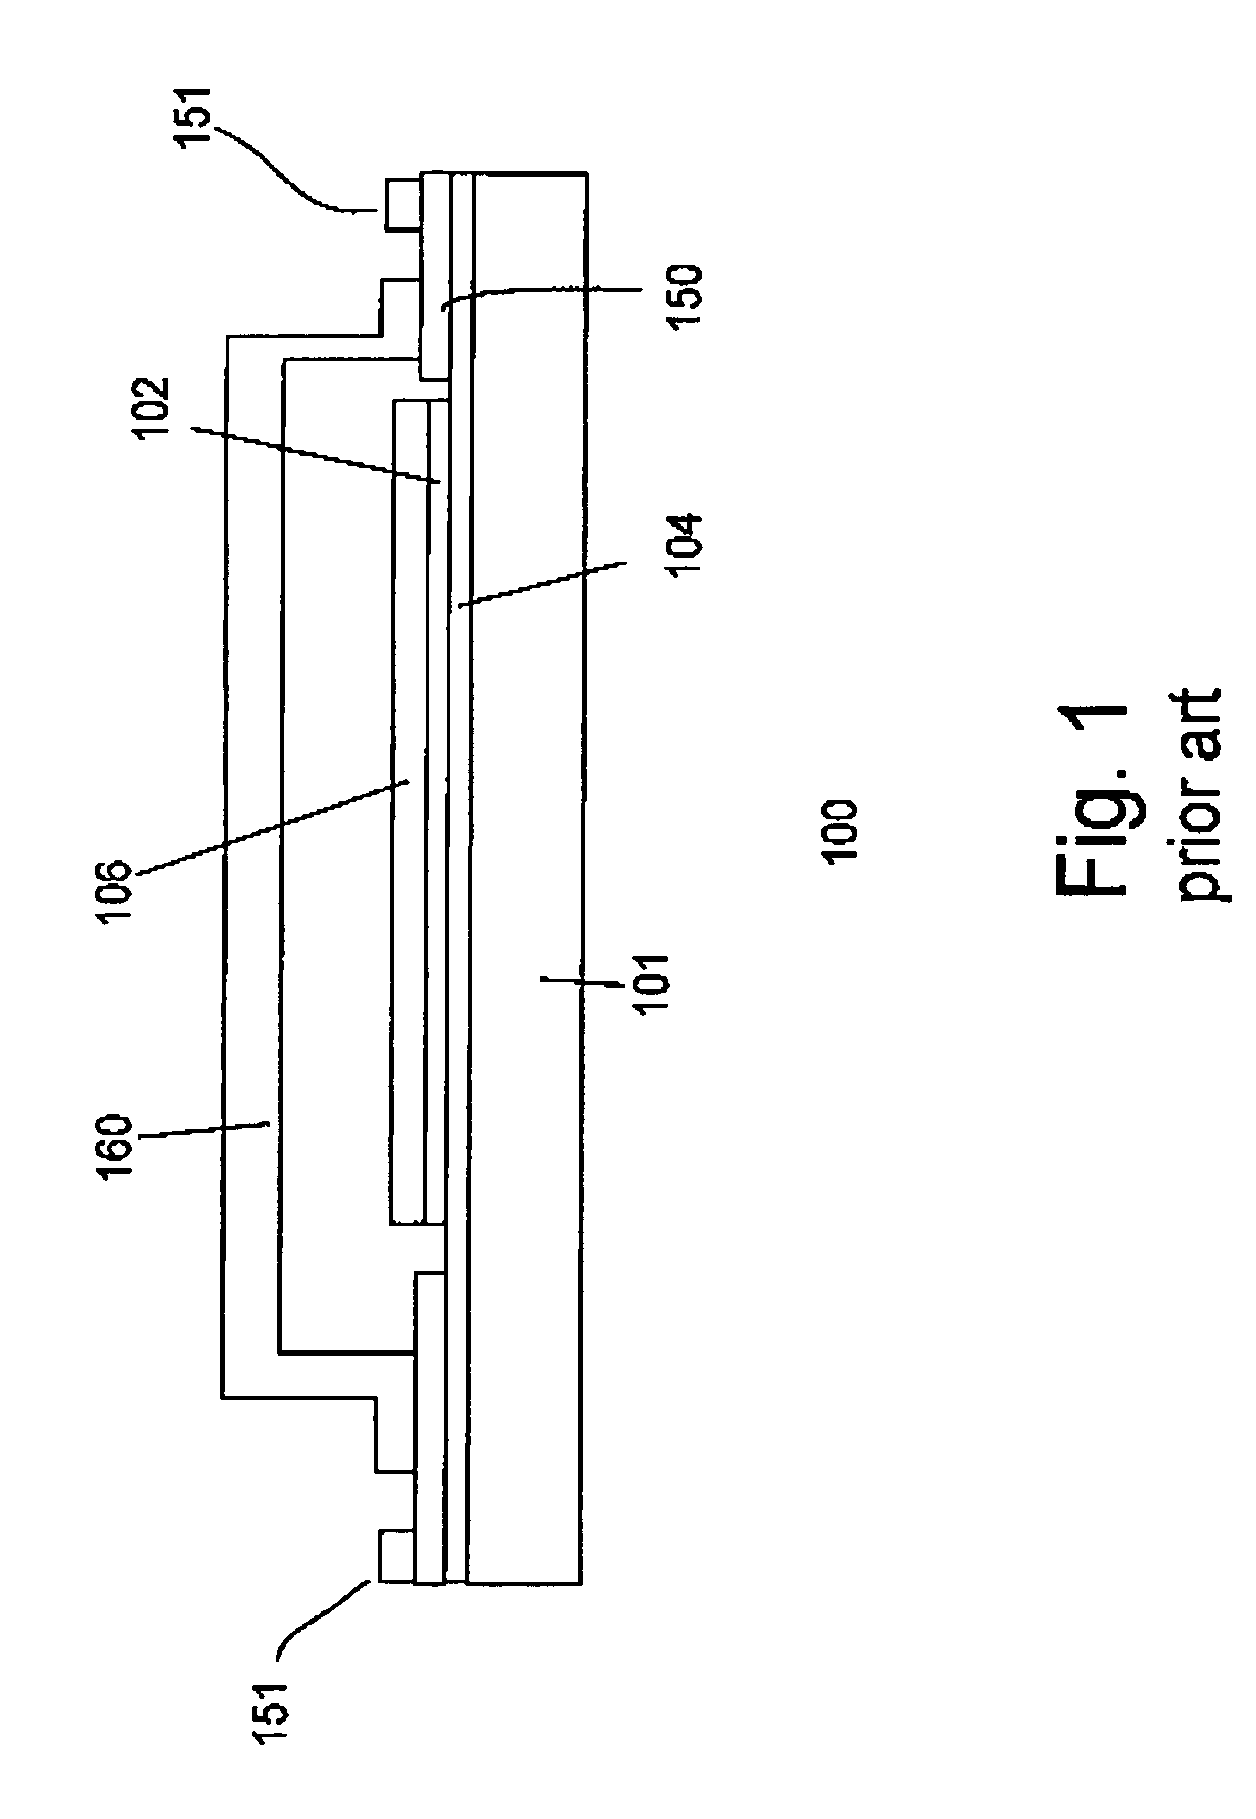 Interconnection for organic devices